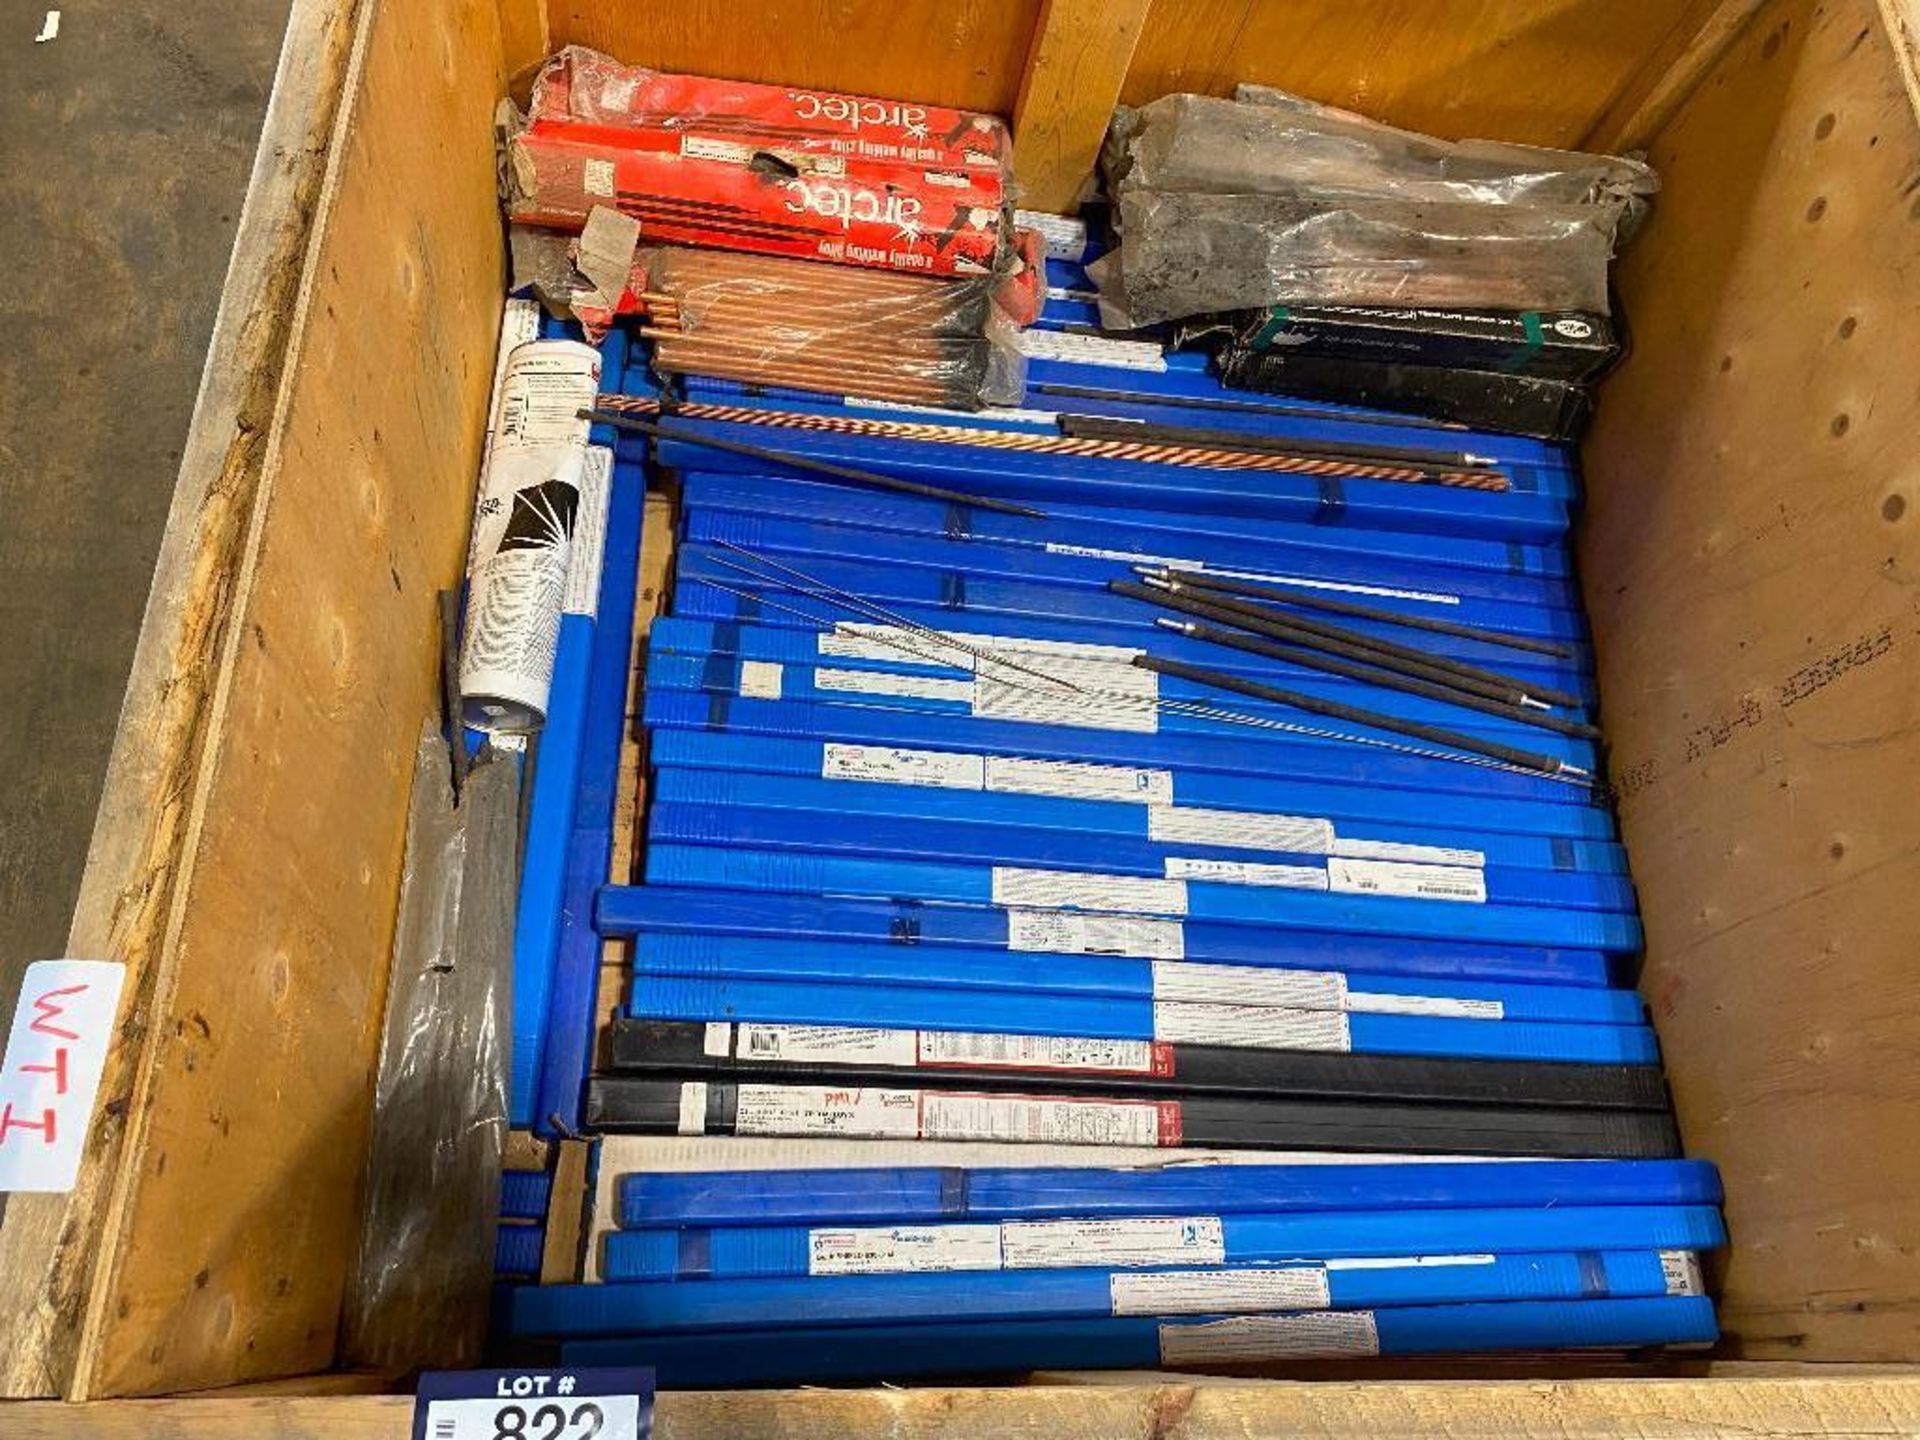 Lot of Asst. Welding Wire, Electrodes, etc. (Crate Not Included) - Image 2 of 3